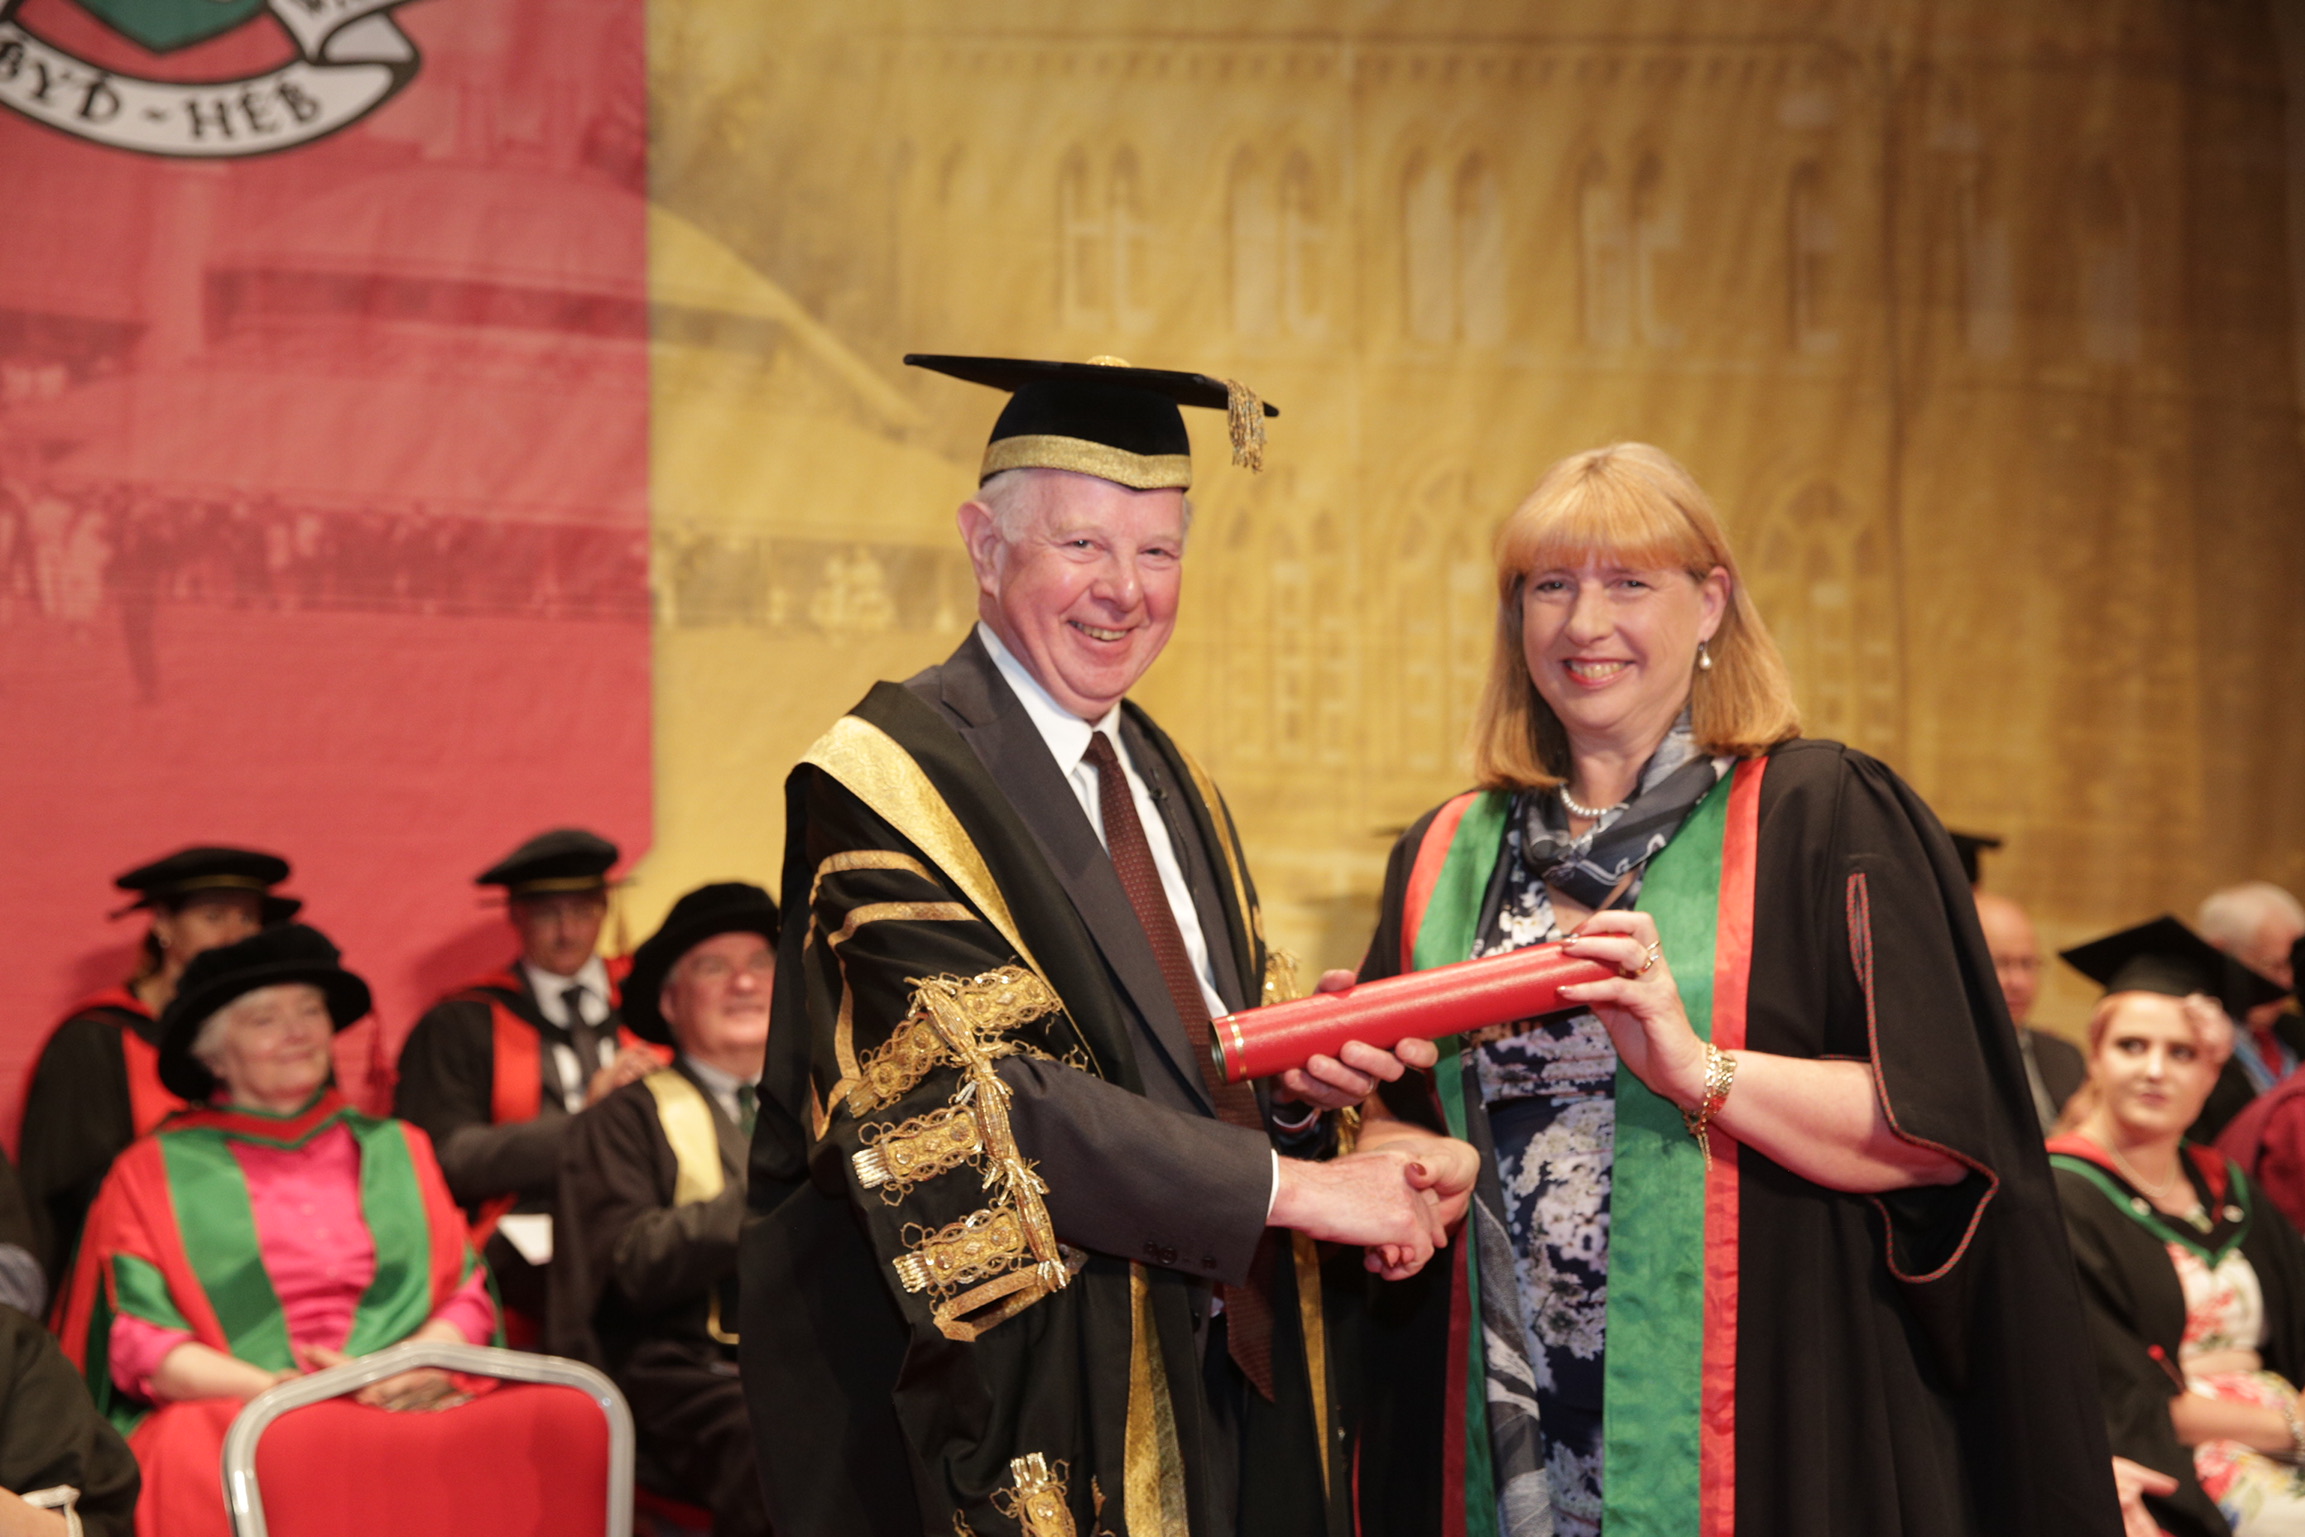 Aberystwyth University Chancellor The Rt Hon. Lord Thomas of Cwmgiedd with Honorary Fellow Professor Ann Sumner